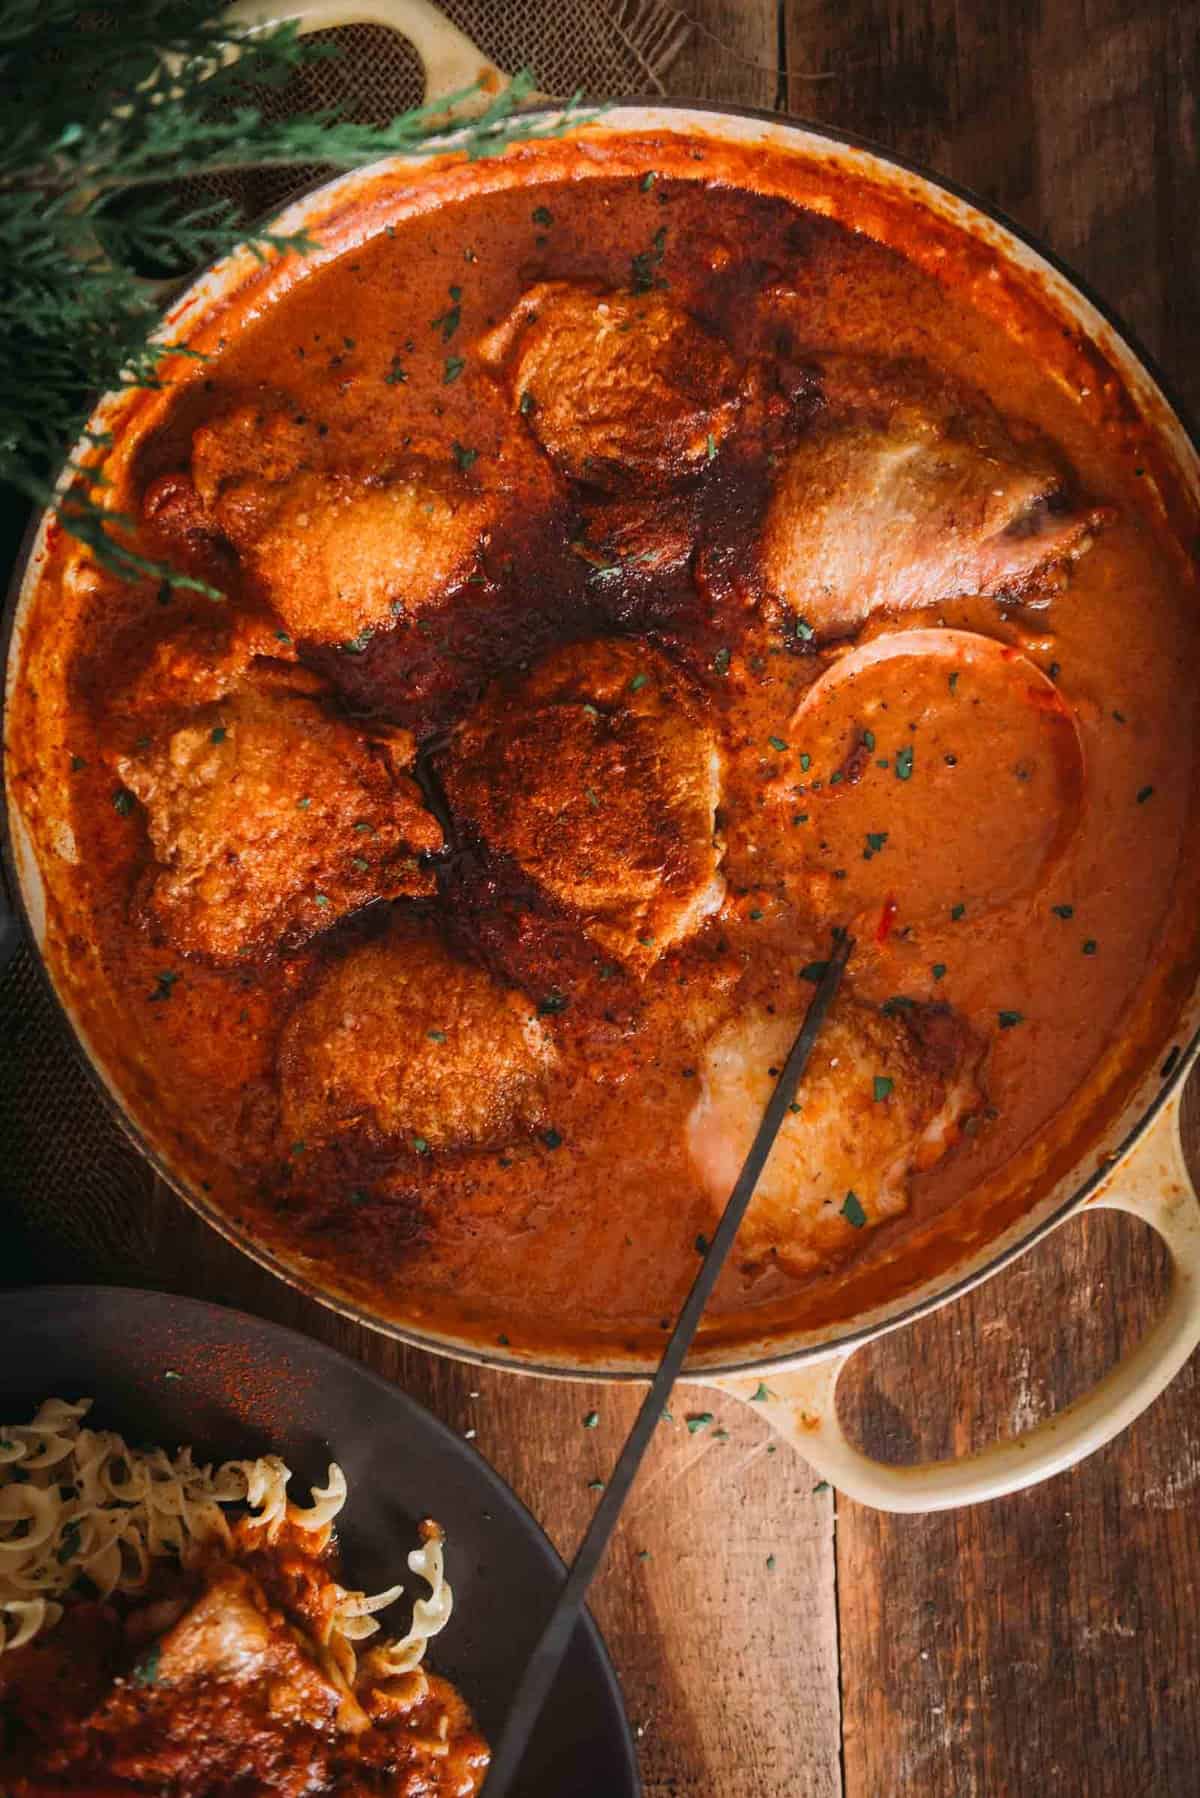 Chicken paprikash in a pan on a wooden table.